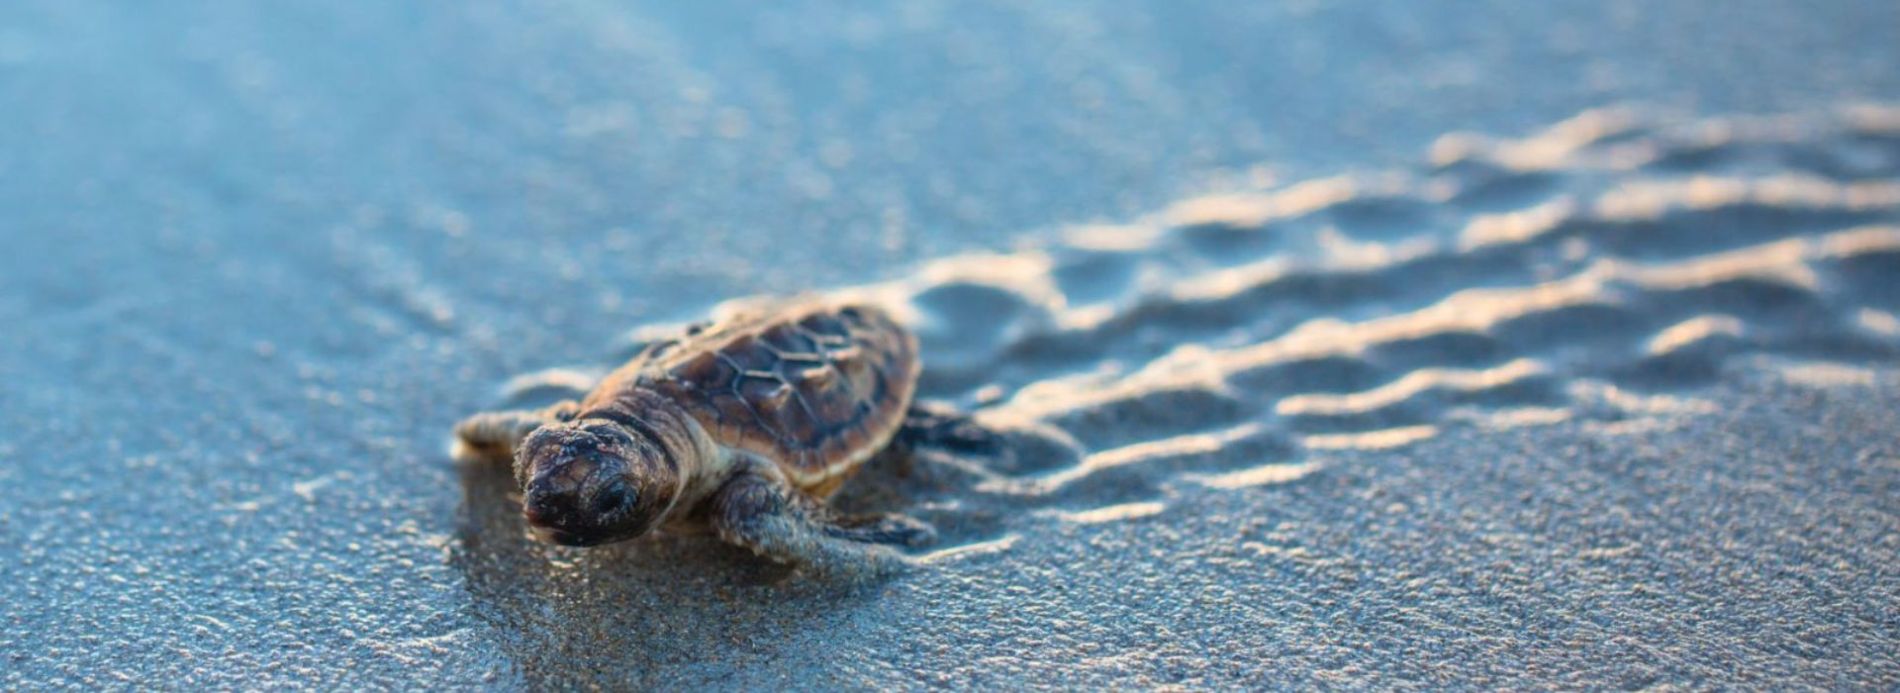 baby sea turtle moving and making tracks on beach as it heads to the ocean